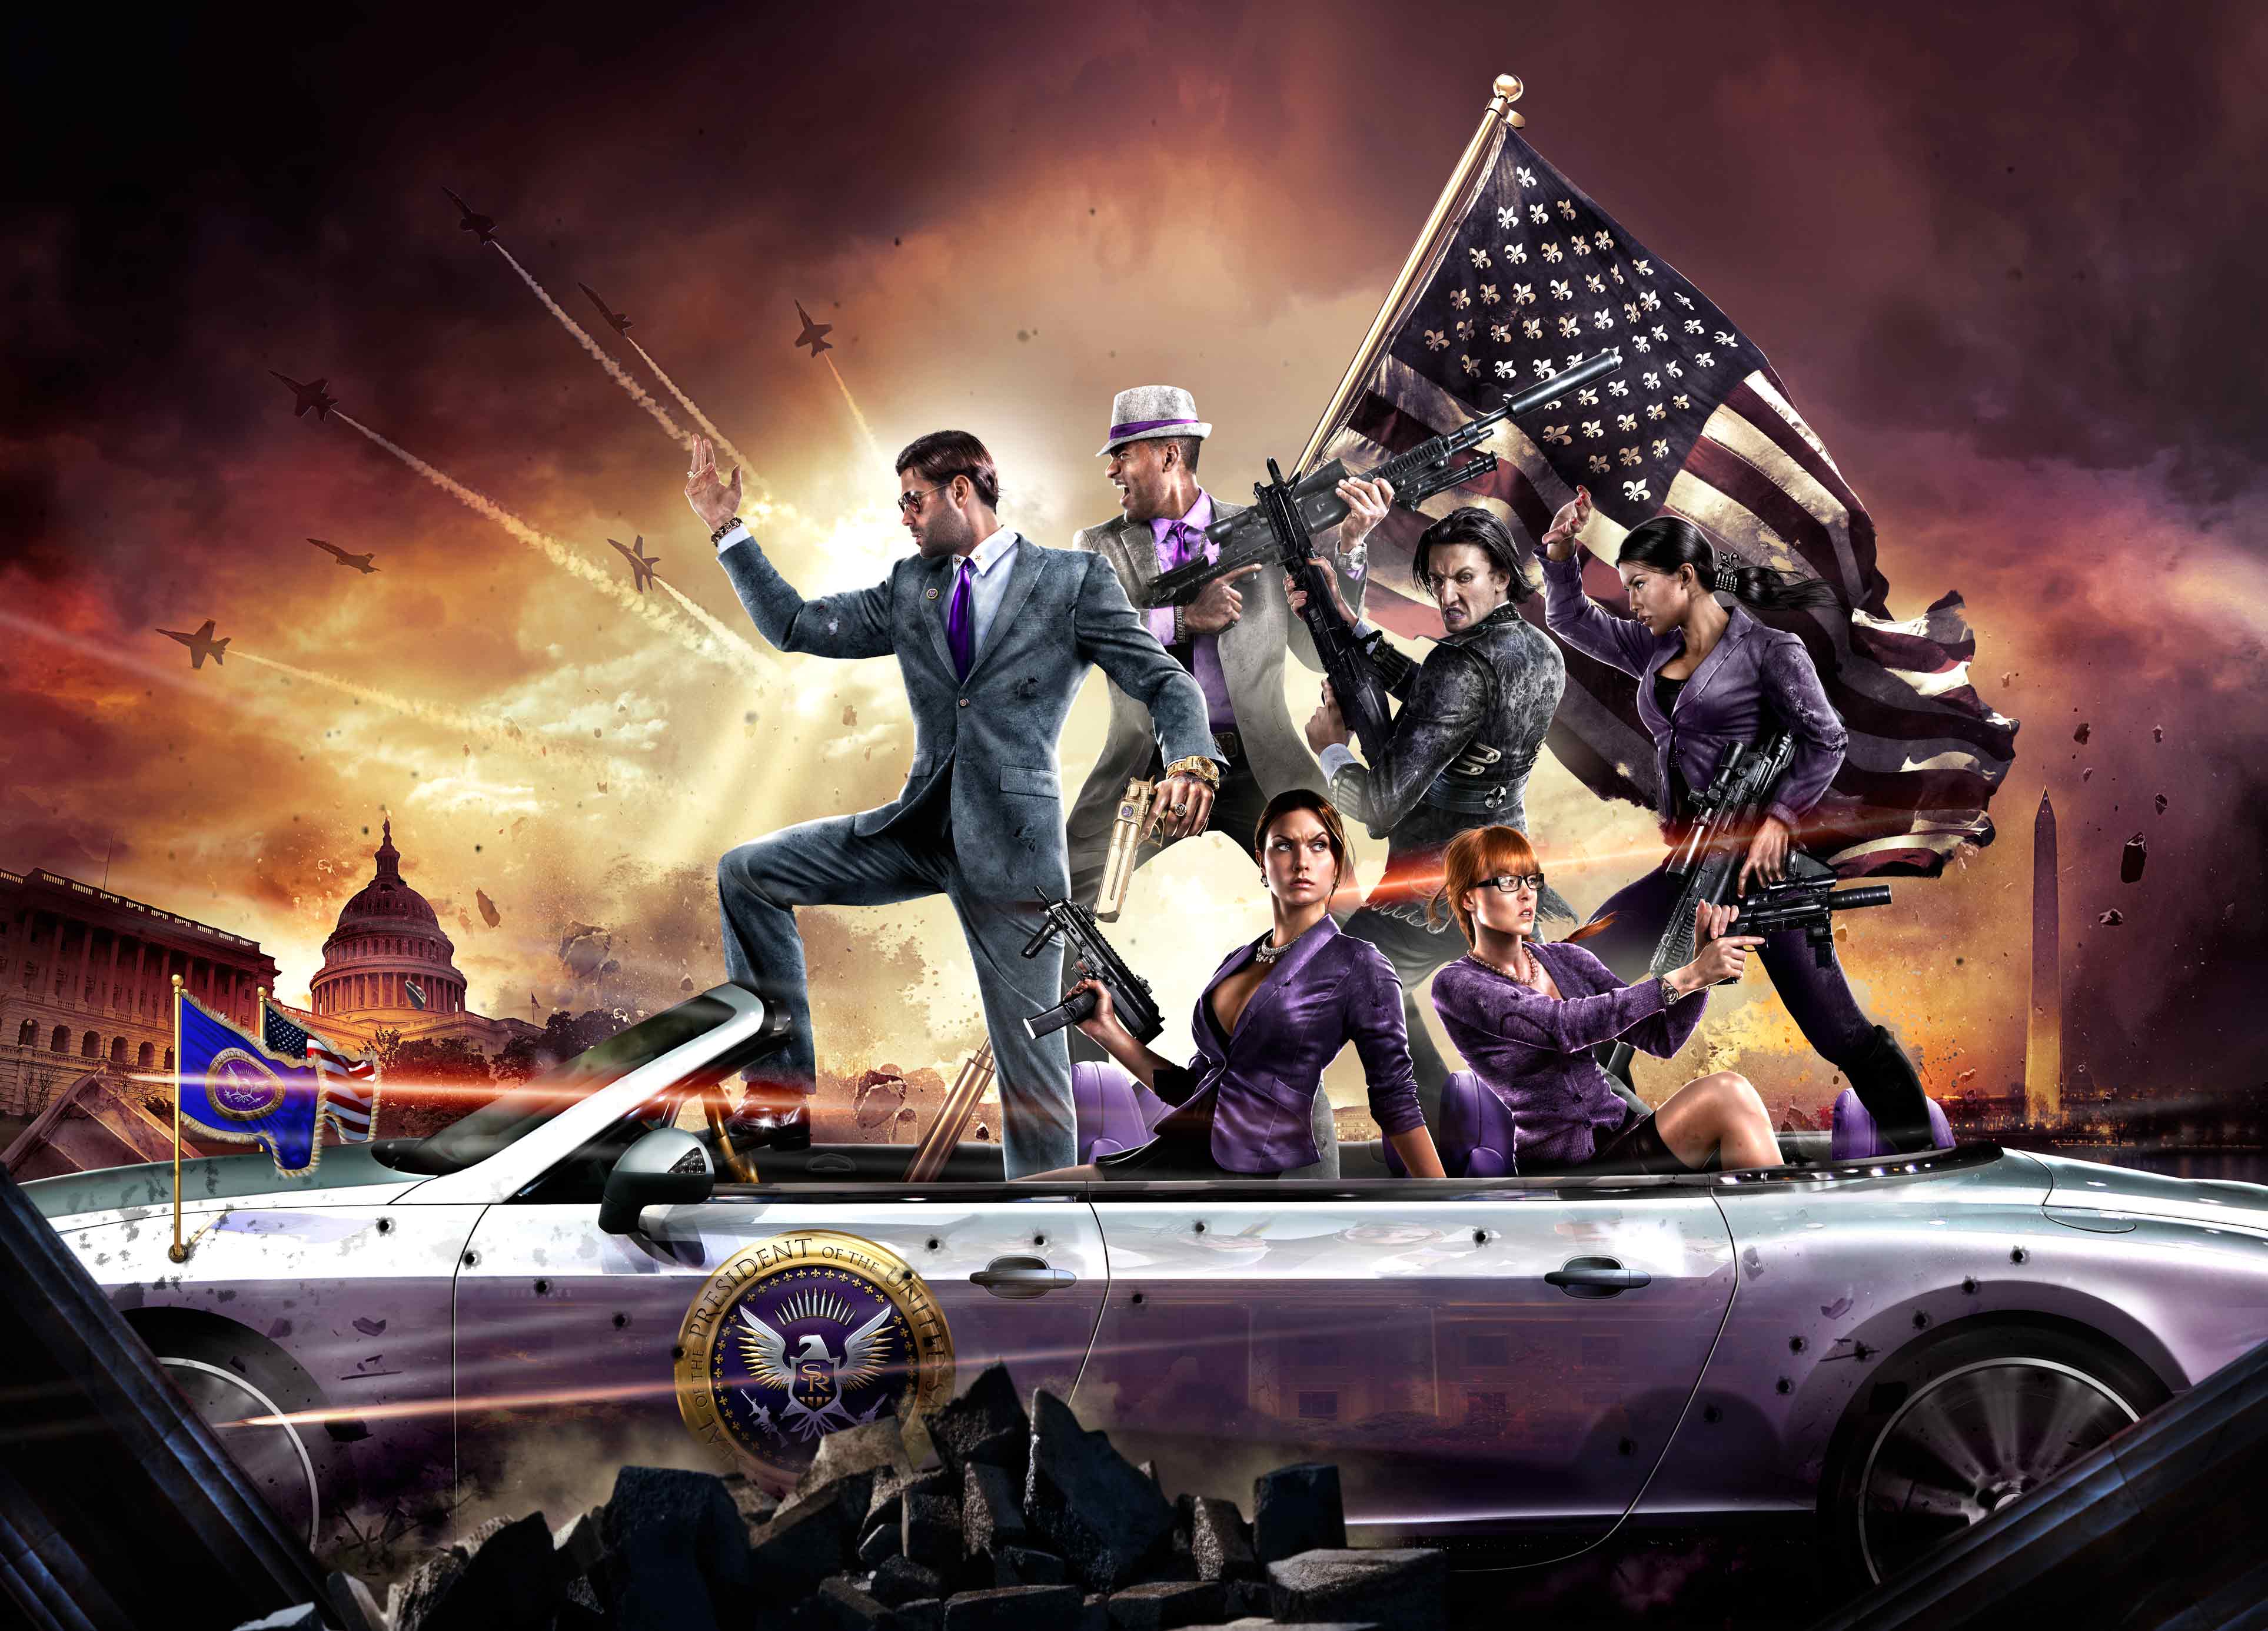 Saints Row: The Third is getting a fresh coat of paint